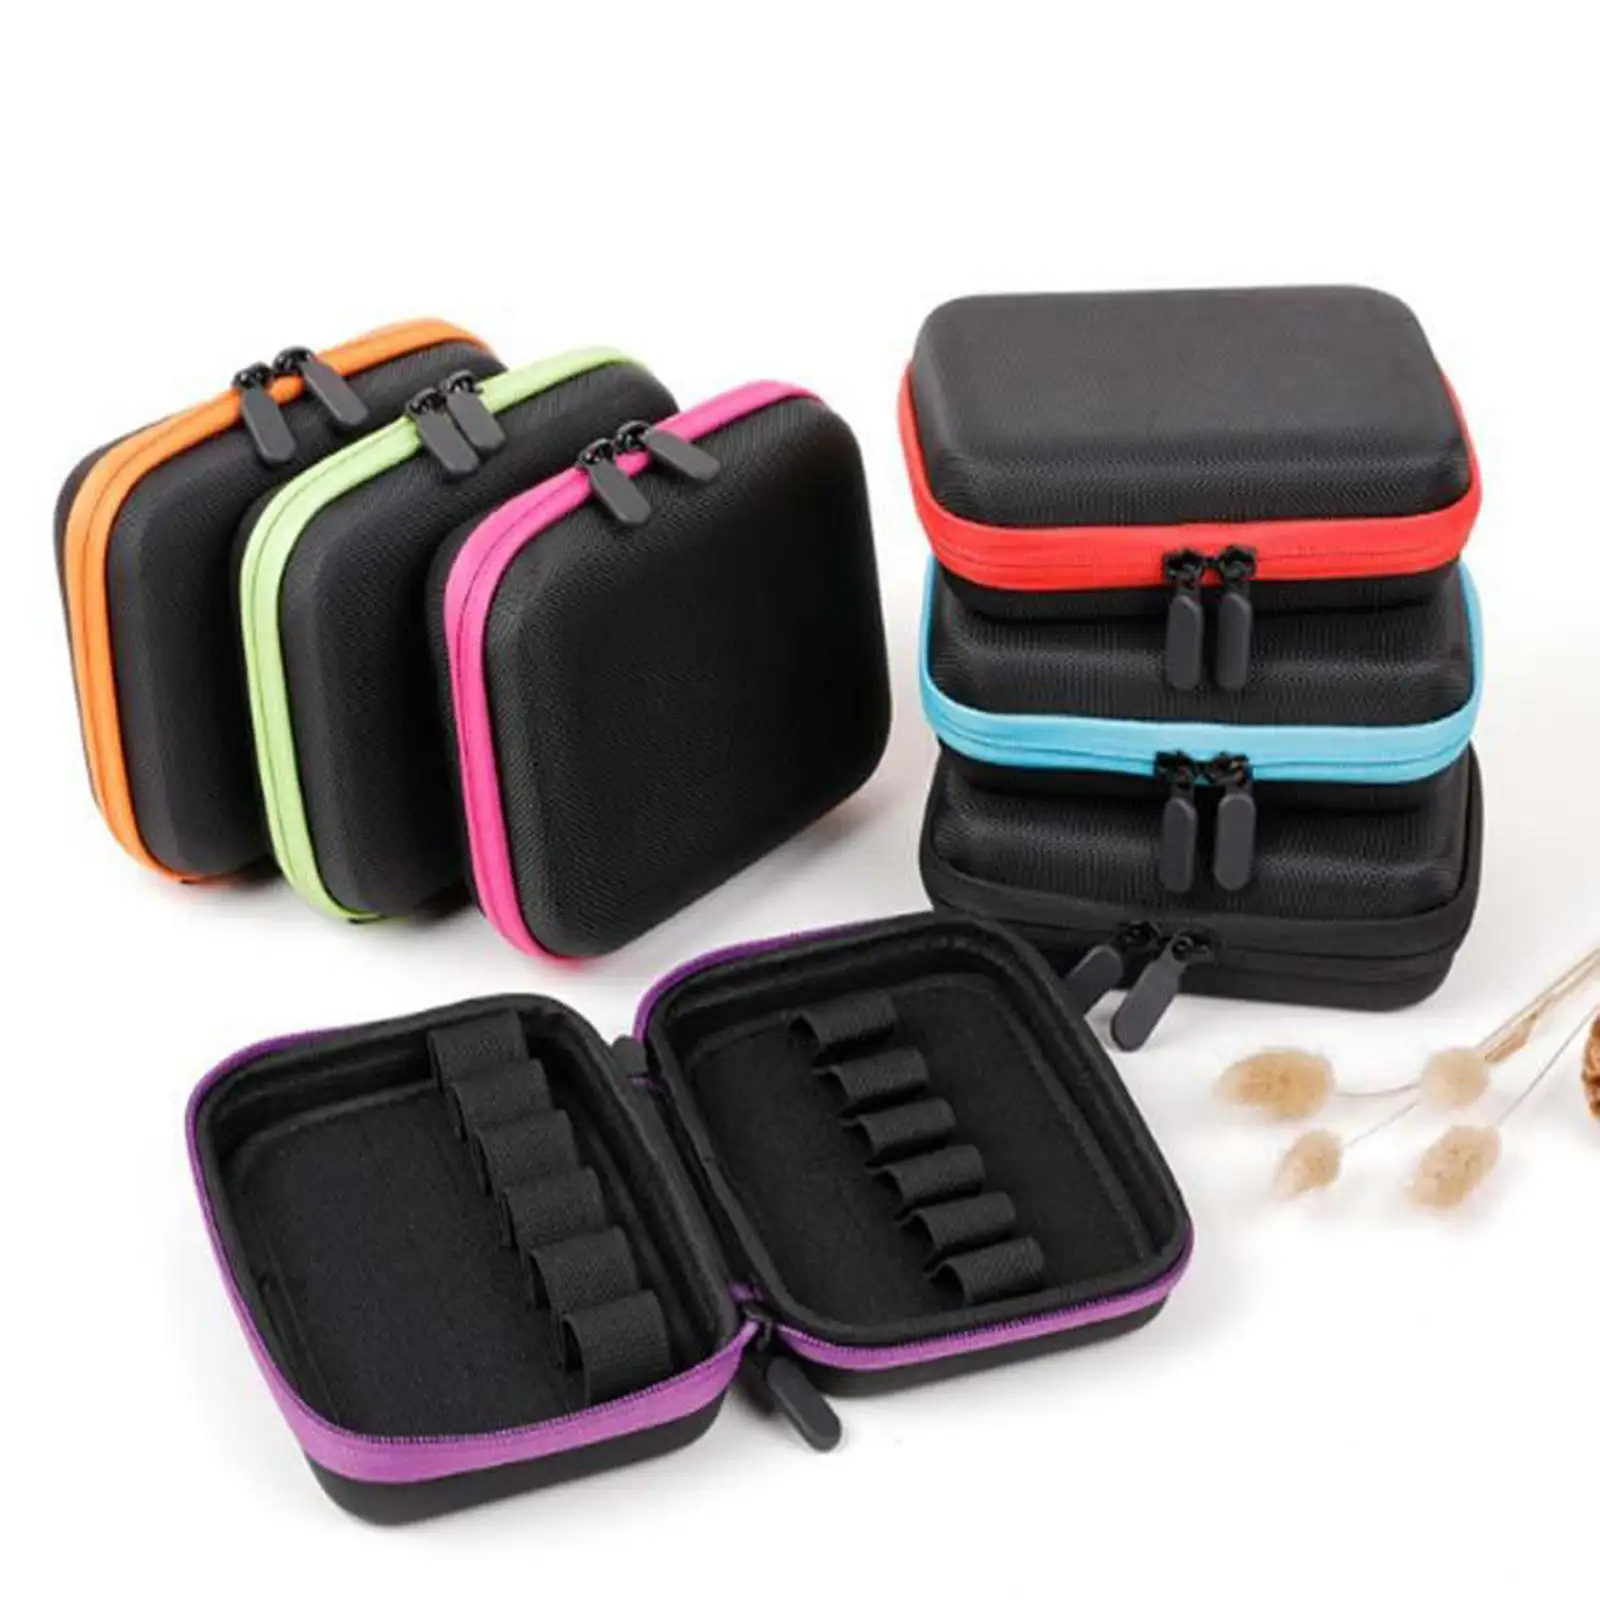 12 Bottle Essential Oil Carry Case 10ML Holder Storage Aromatherapy Hand Bag portable Traveling Carrying Case Holder Organize